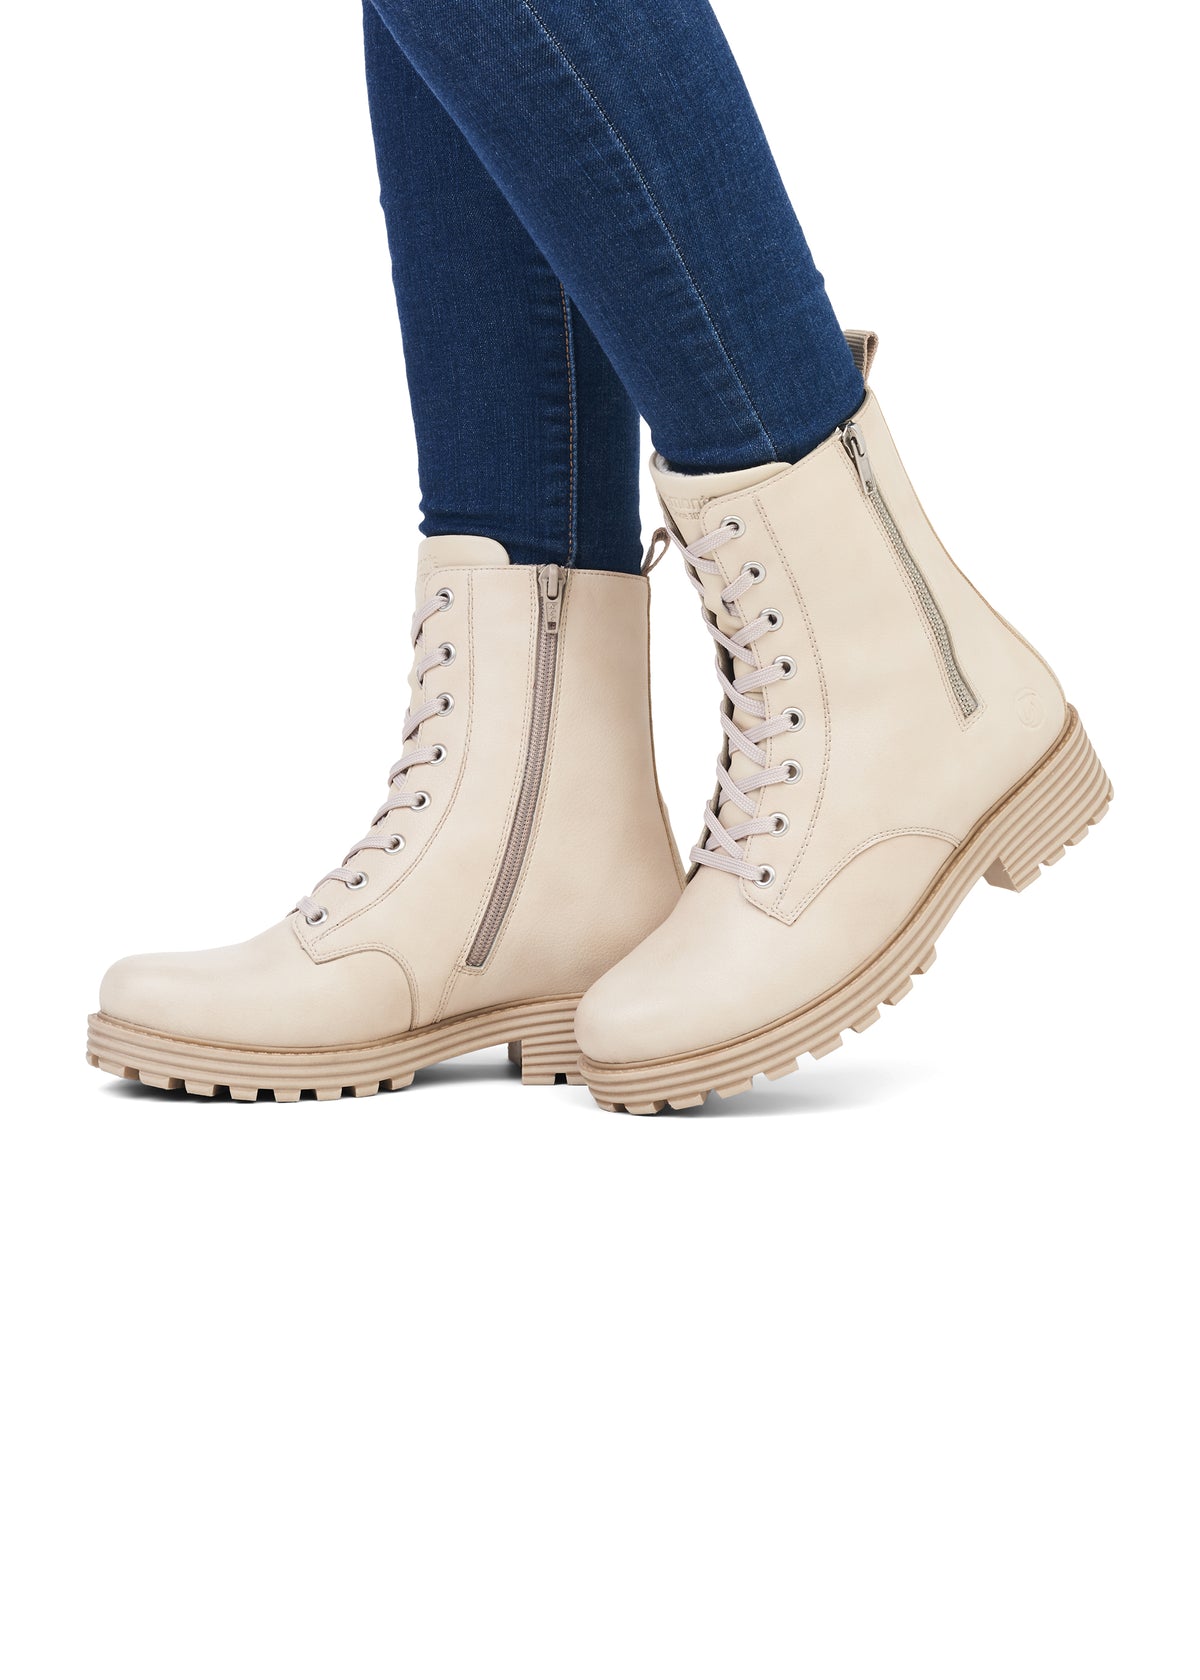 Winter ankle boots with a thick sole - beige